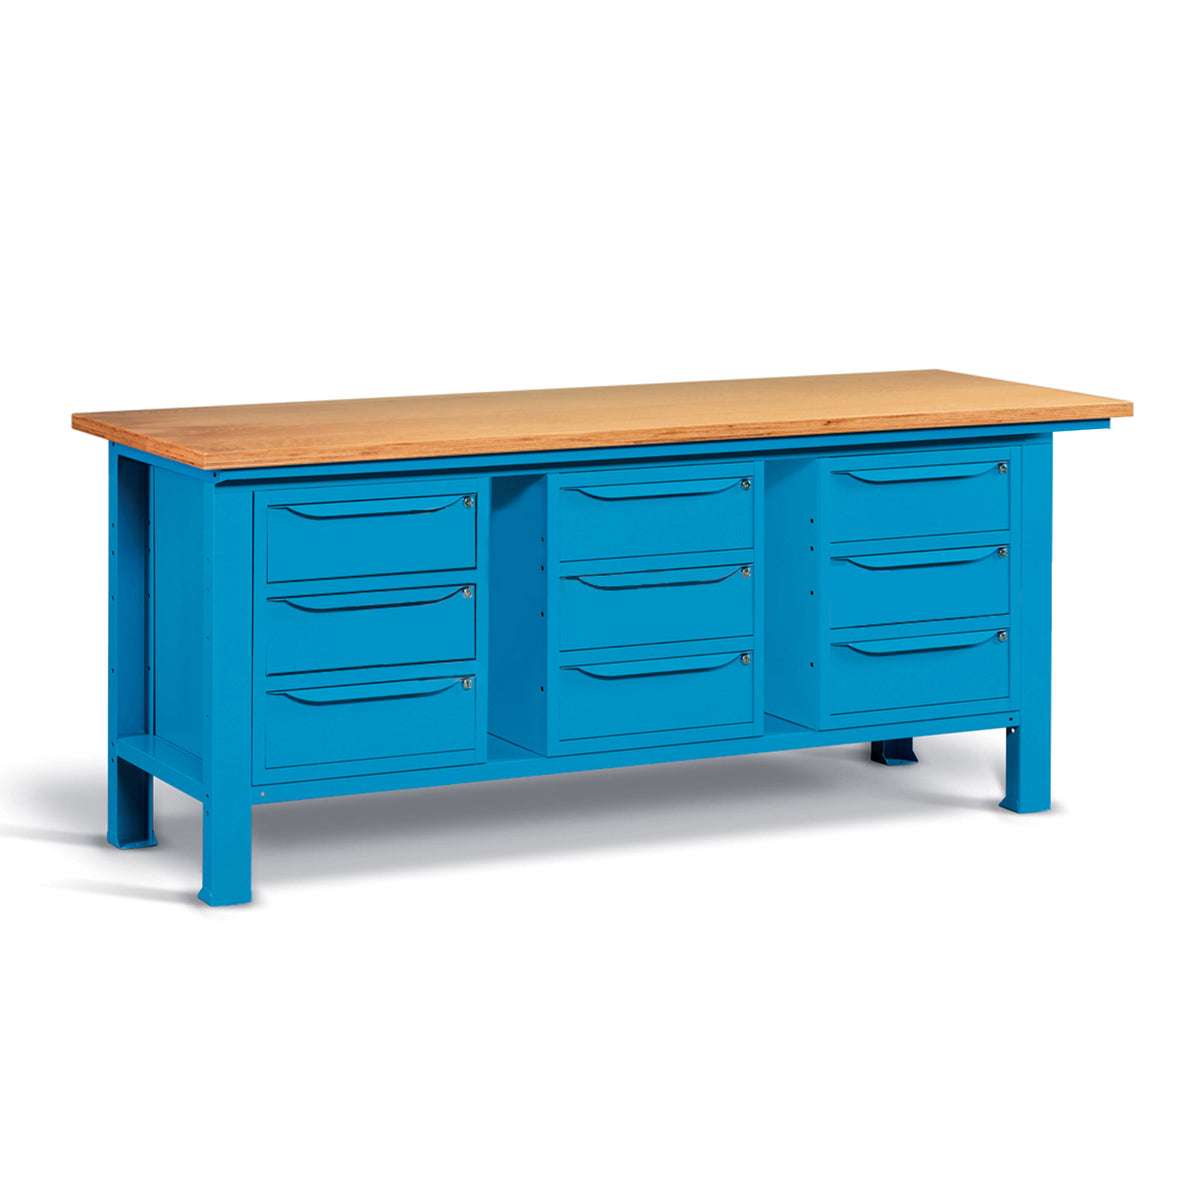 WORKSHOP WORKBENCH WOODEN TOP 2000 X 750 X 880 H - 3 CABINETS 3 DRAWERS - FAMI - BLUE